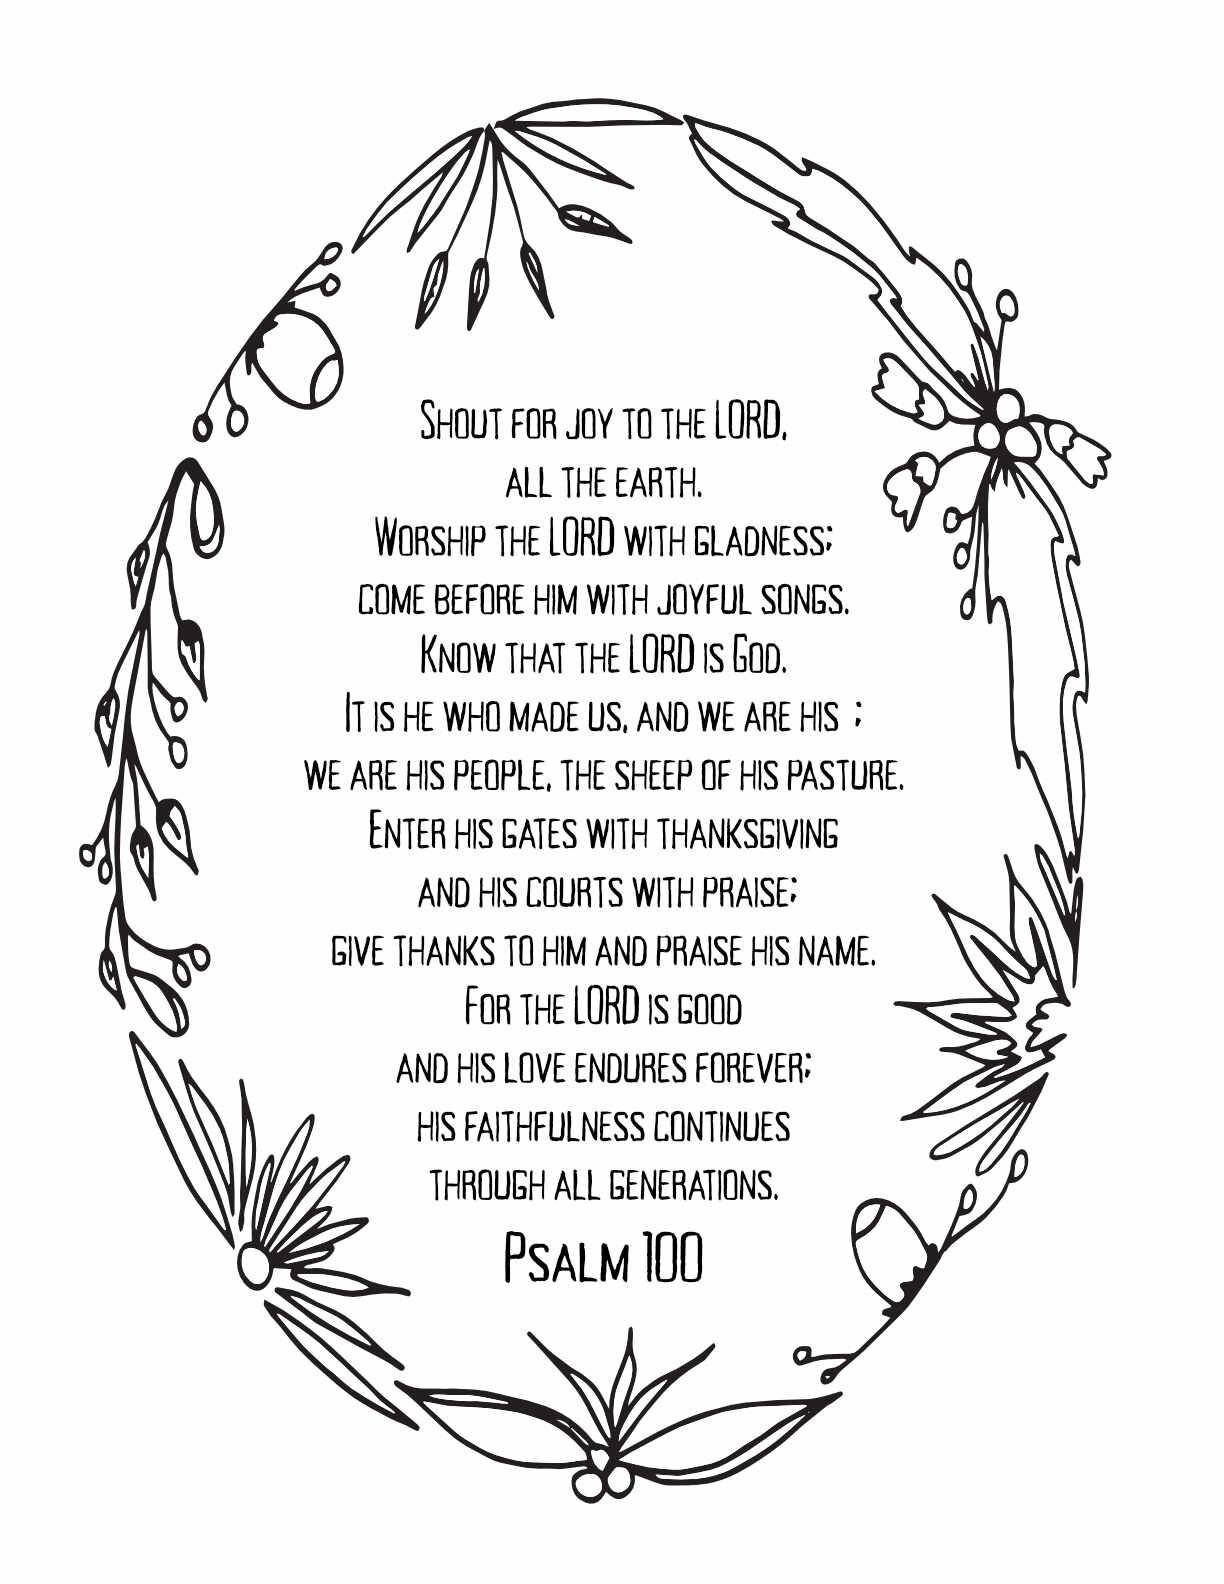 10 Free Printable Psalm Coloring Pages - Download and Color Adult Scripture - Psalm 100CLICK HERE TO DOWNLOAD THIS PAGE FREE